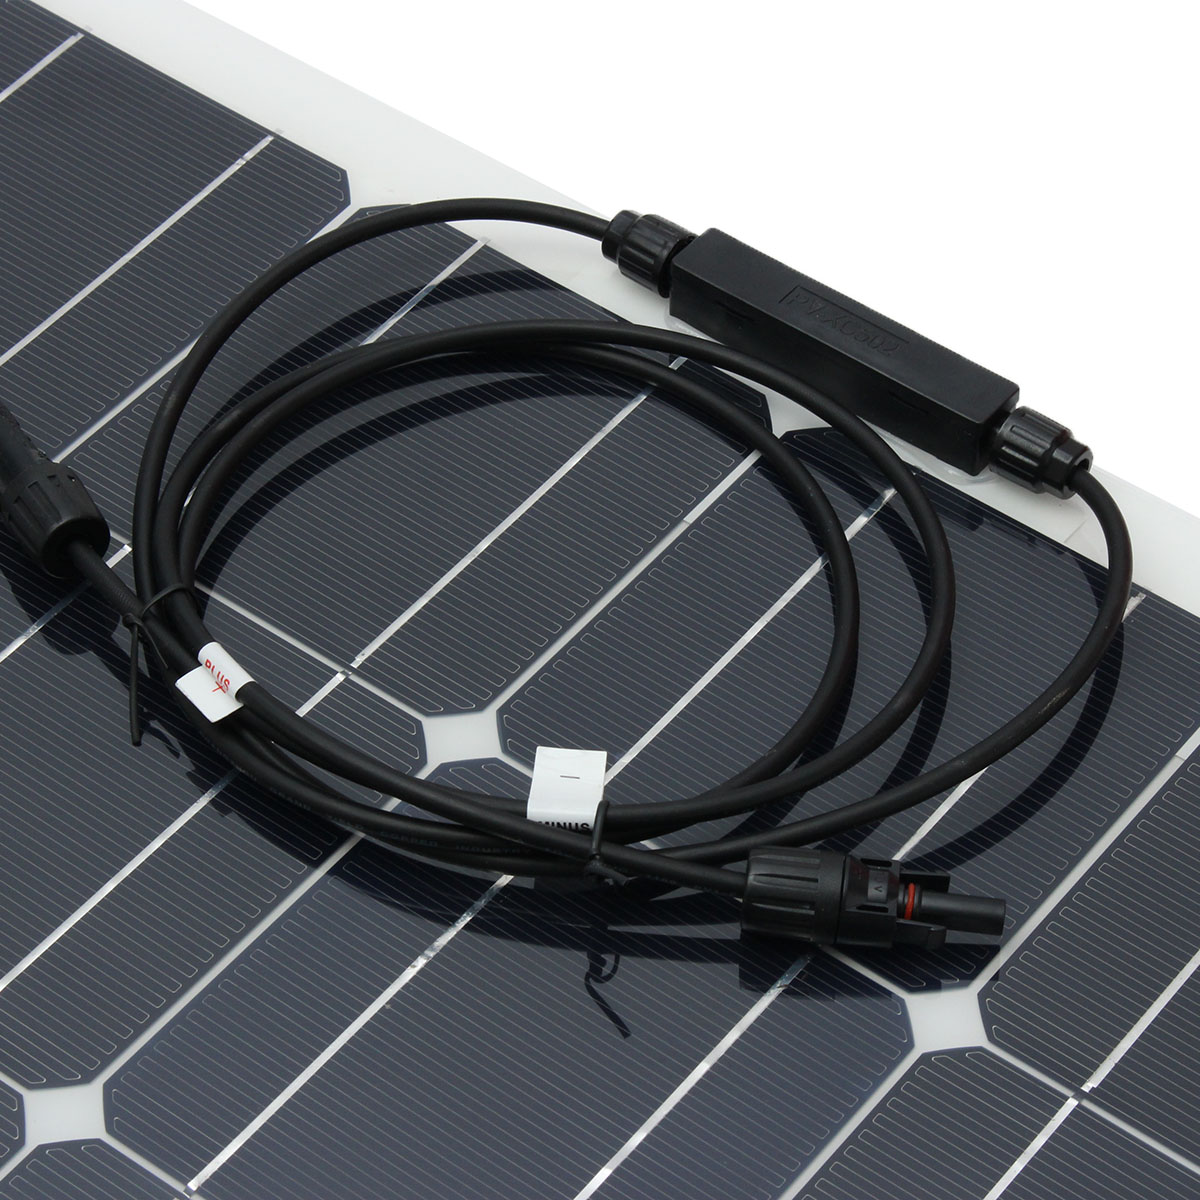 Elfeland® SP-39 120W 1180*540mm Semi-Flexible Solar Panel With 1.5m Cable Front Junction Box 13